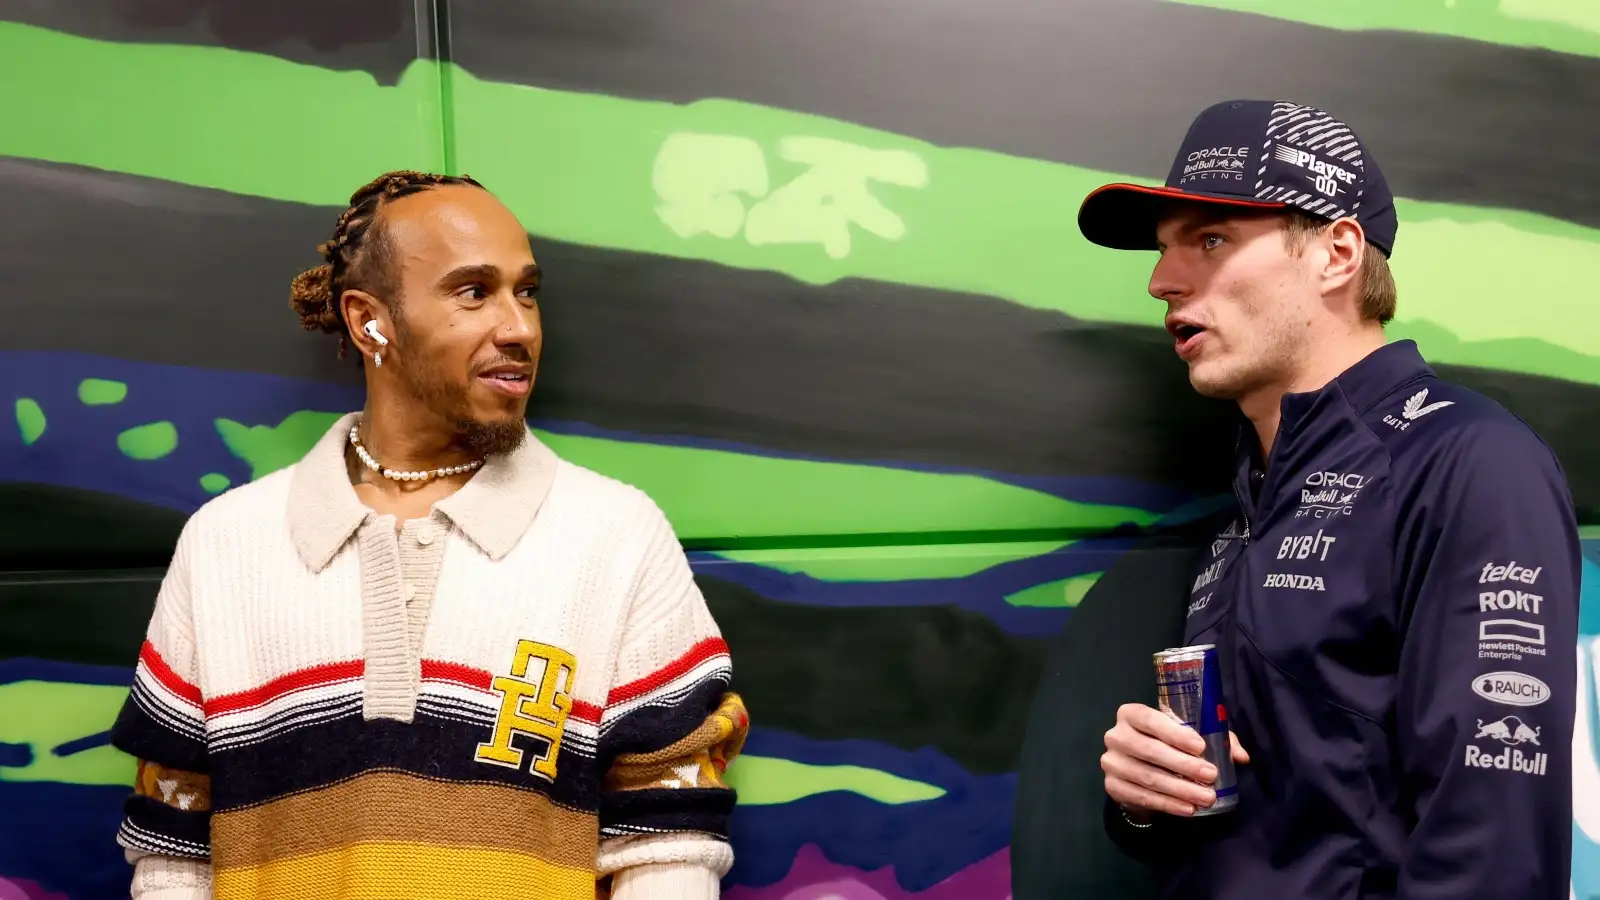 Lewis Hamilton and Max Verstappen catch up at the Las Vegas Grand Prix